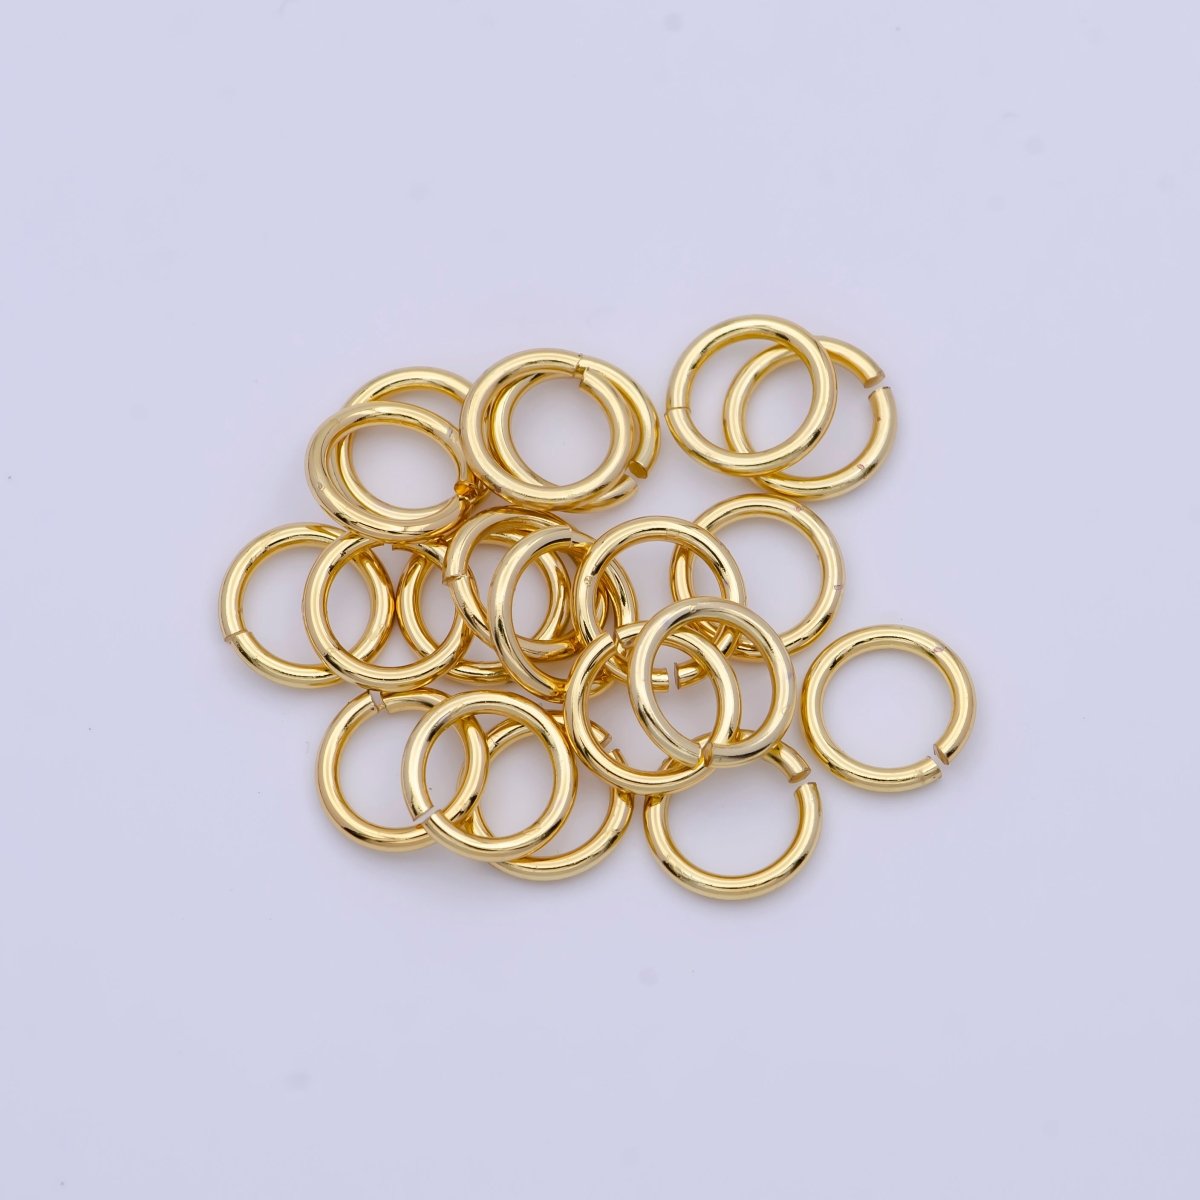 14K Gold Filled 7mmx0.7mm Jump Ring Findings Set | Z781 - DLUXCA